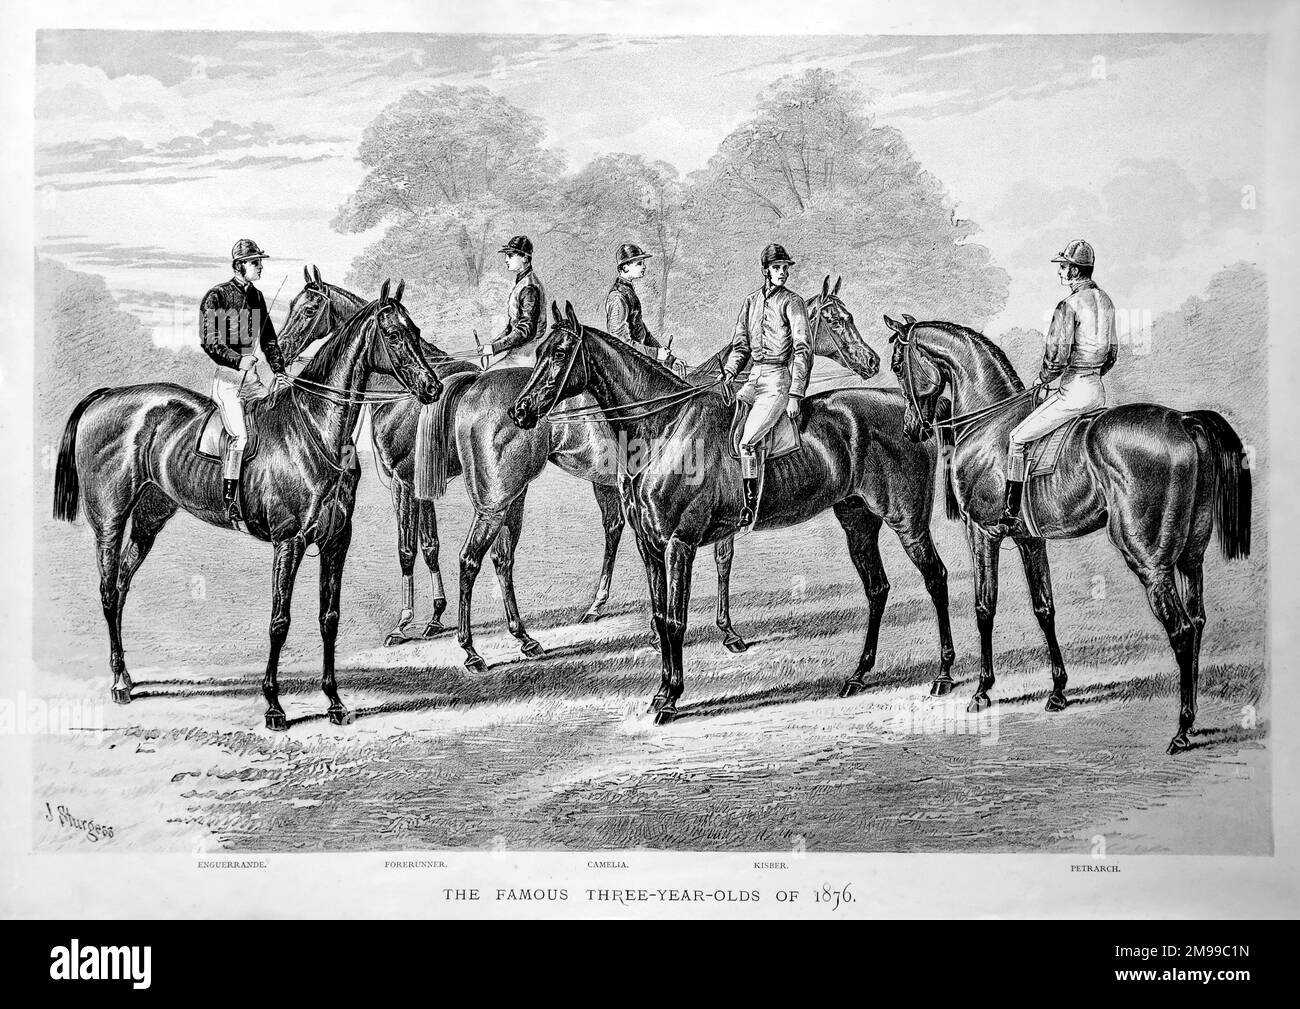 Five famous three-year-old racehorses of 1876 - Enguerrande, Forerunner, Camelia, Kisber and Petrarch. Stock Photo